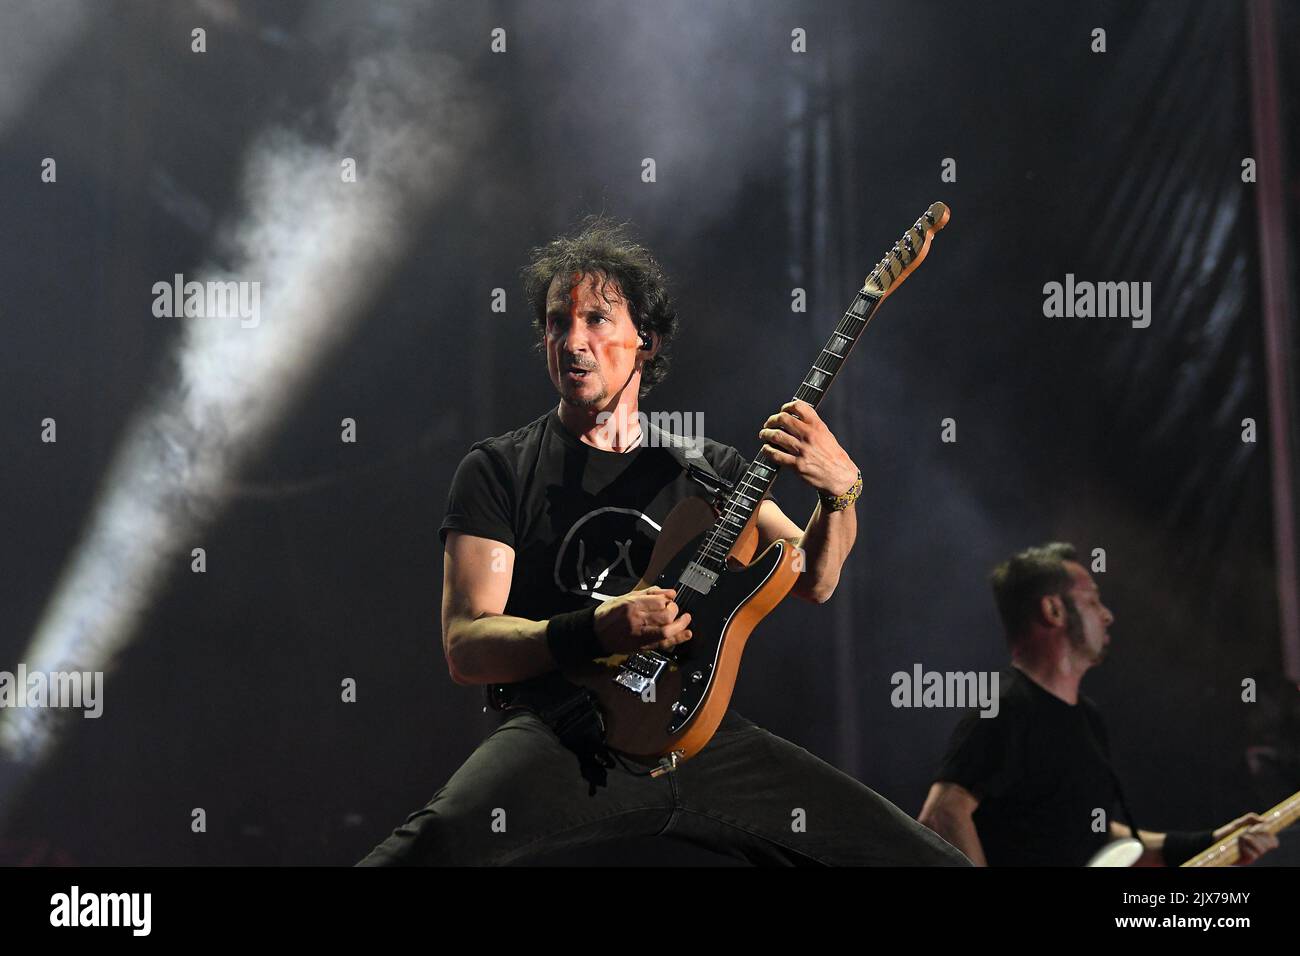 Rio de Janeiro, Brazil,September 2, 2022. Vocalist and guitarist Joe Duplantier of the French rock band Gojira, during a concert at Rock in Rio 2022, Stock Photo